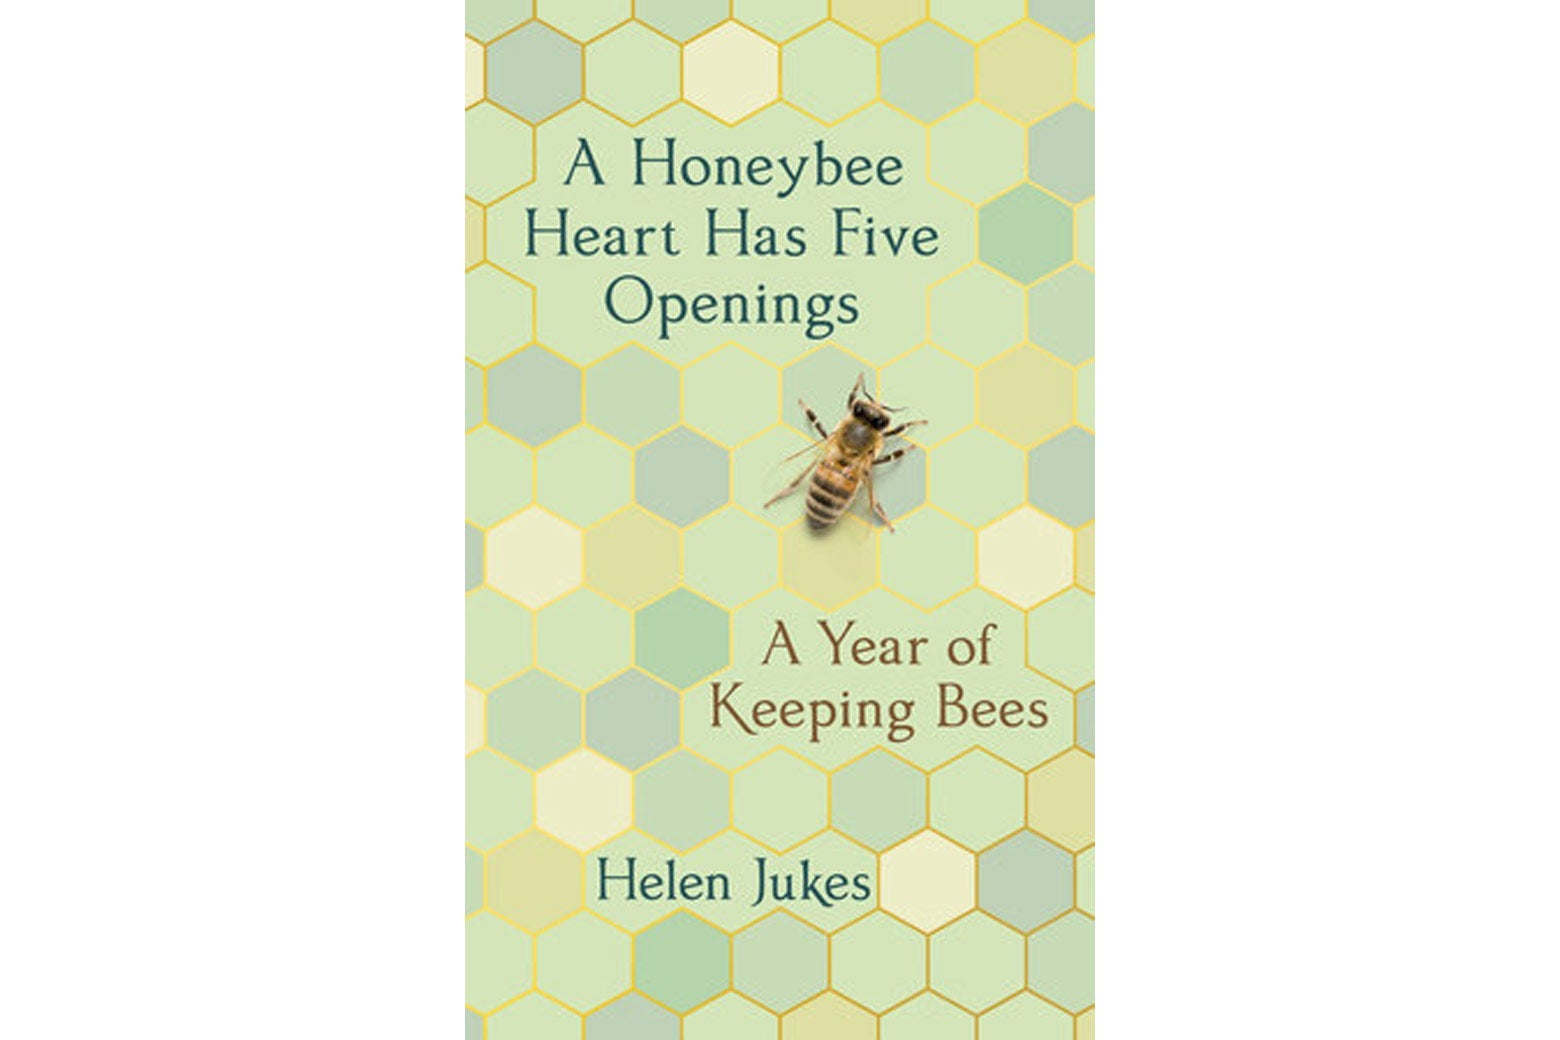 The cover of A Honeybee Heart Has Five Openings.